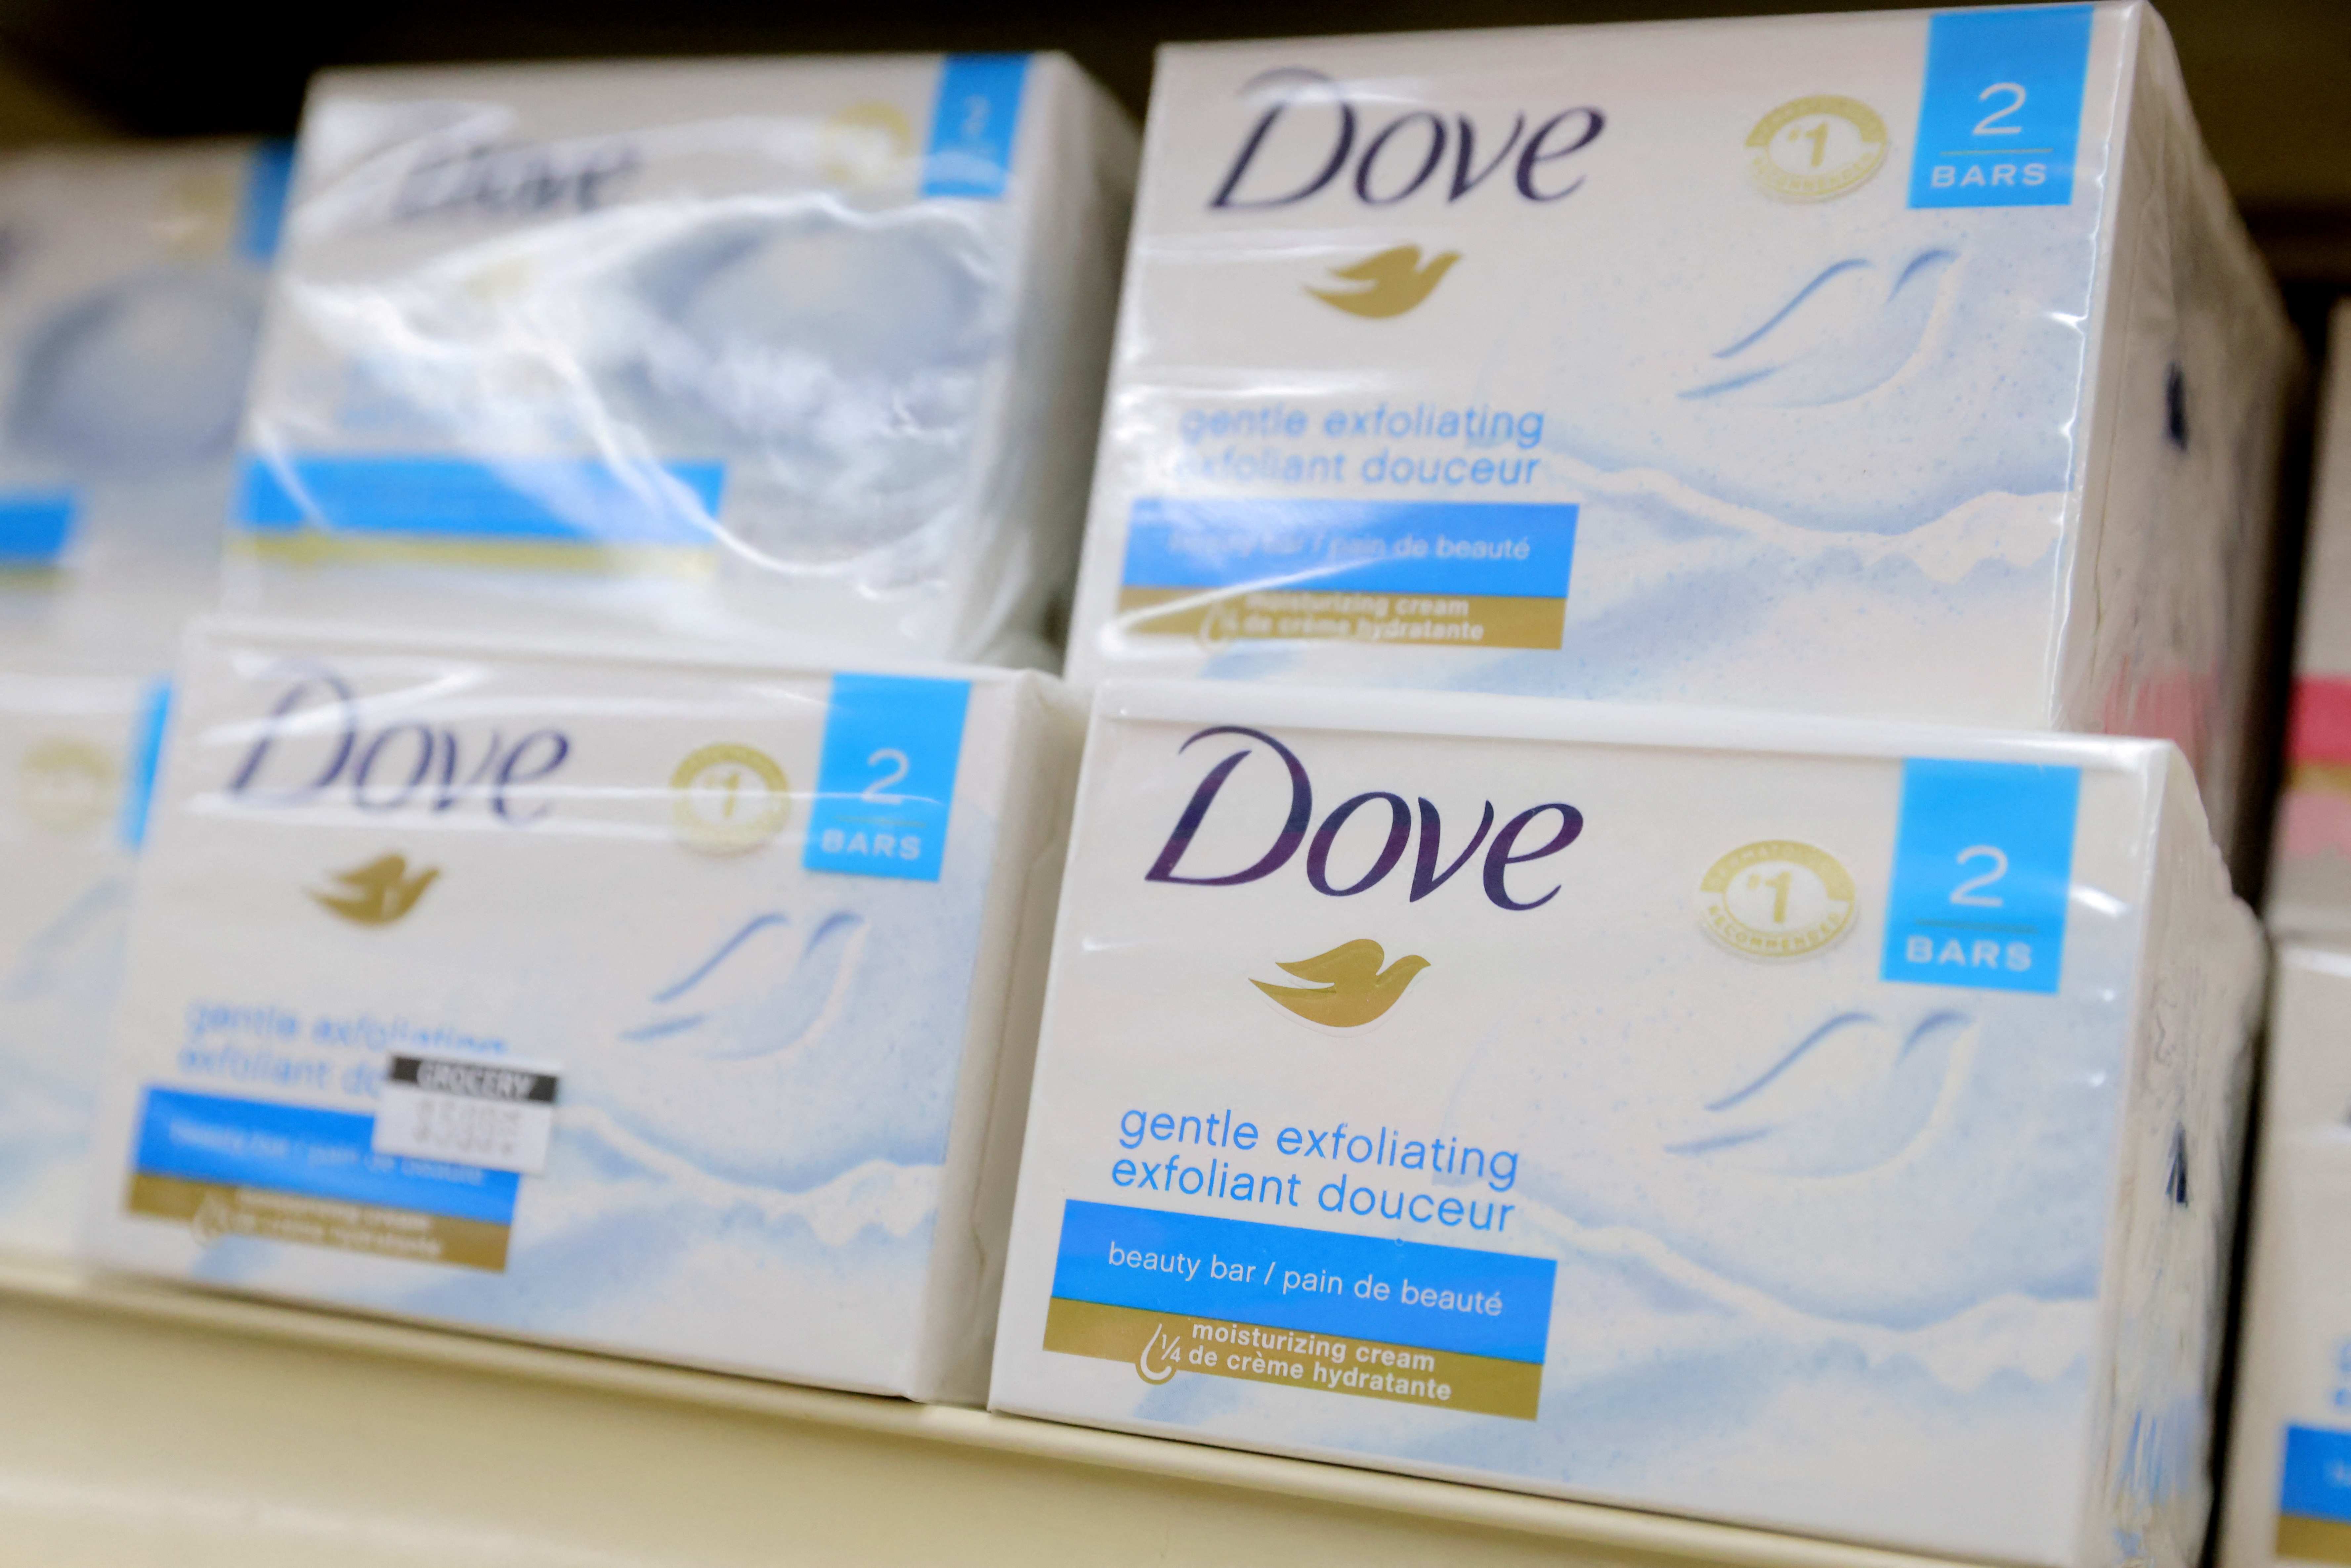 Dove, a brand of Unilever, is seen on display in a store in Manhattan, New York City